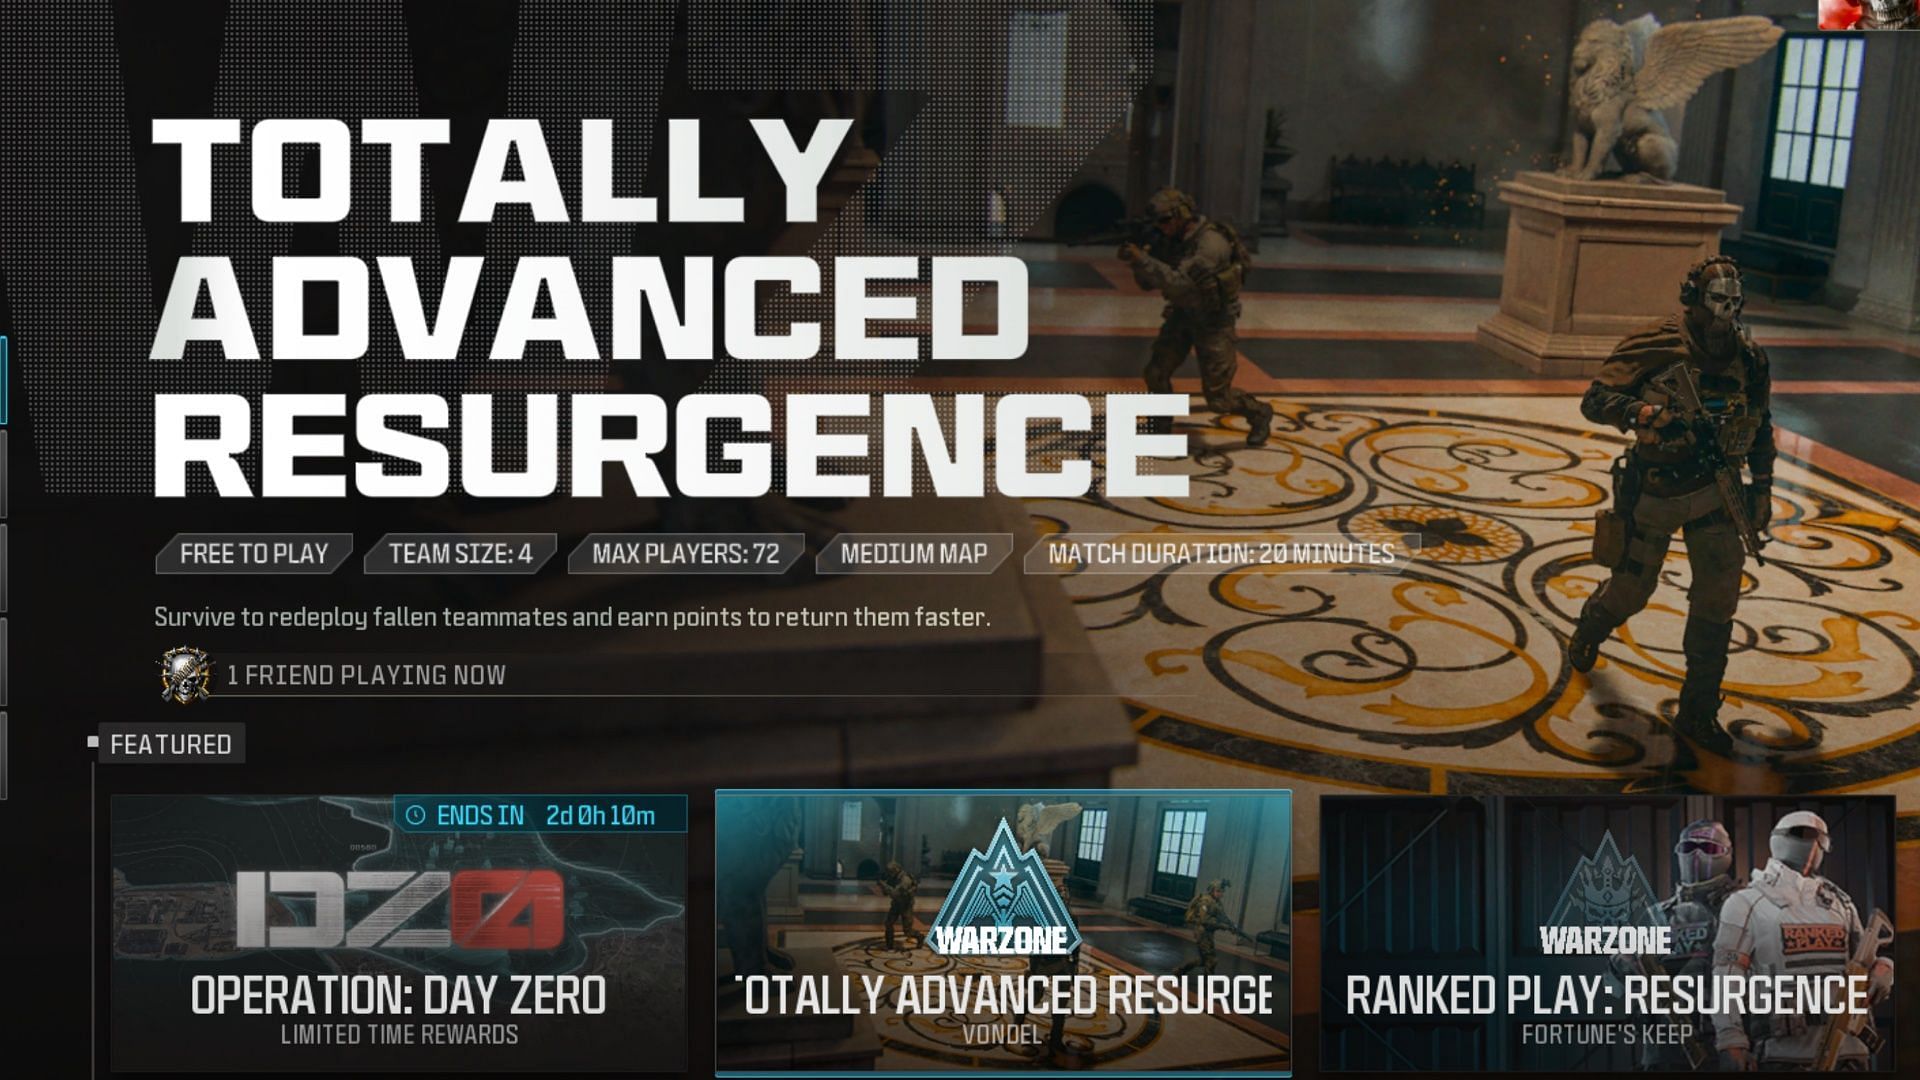 Totally Advanced Resurgence in Warzone (Image via Activision)